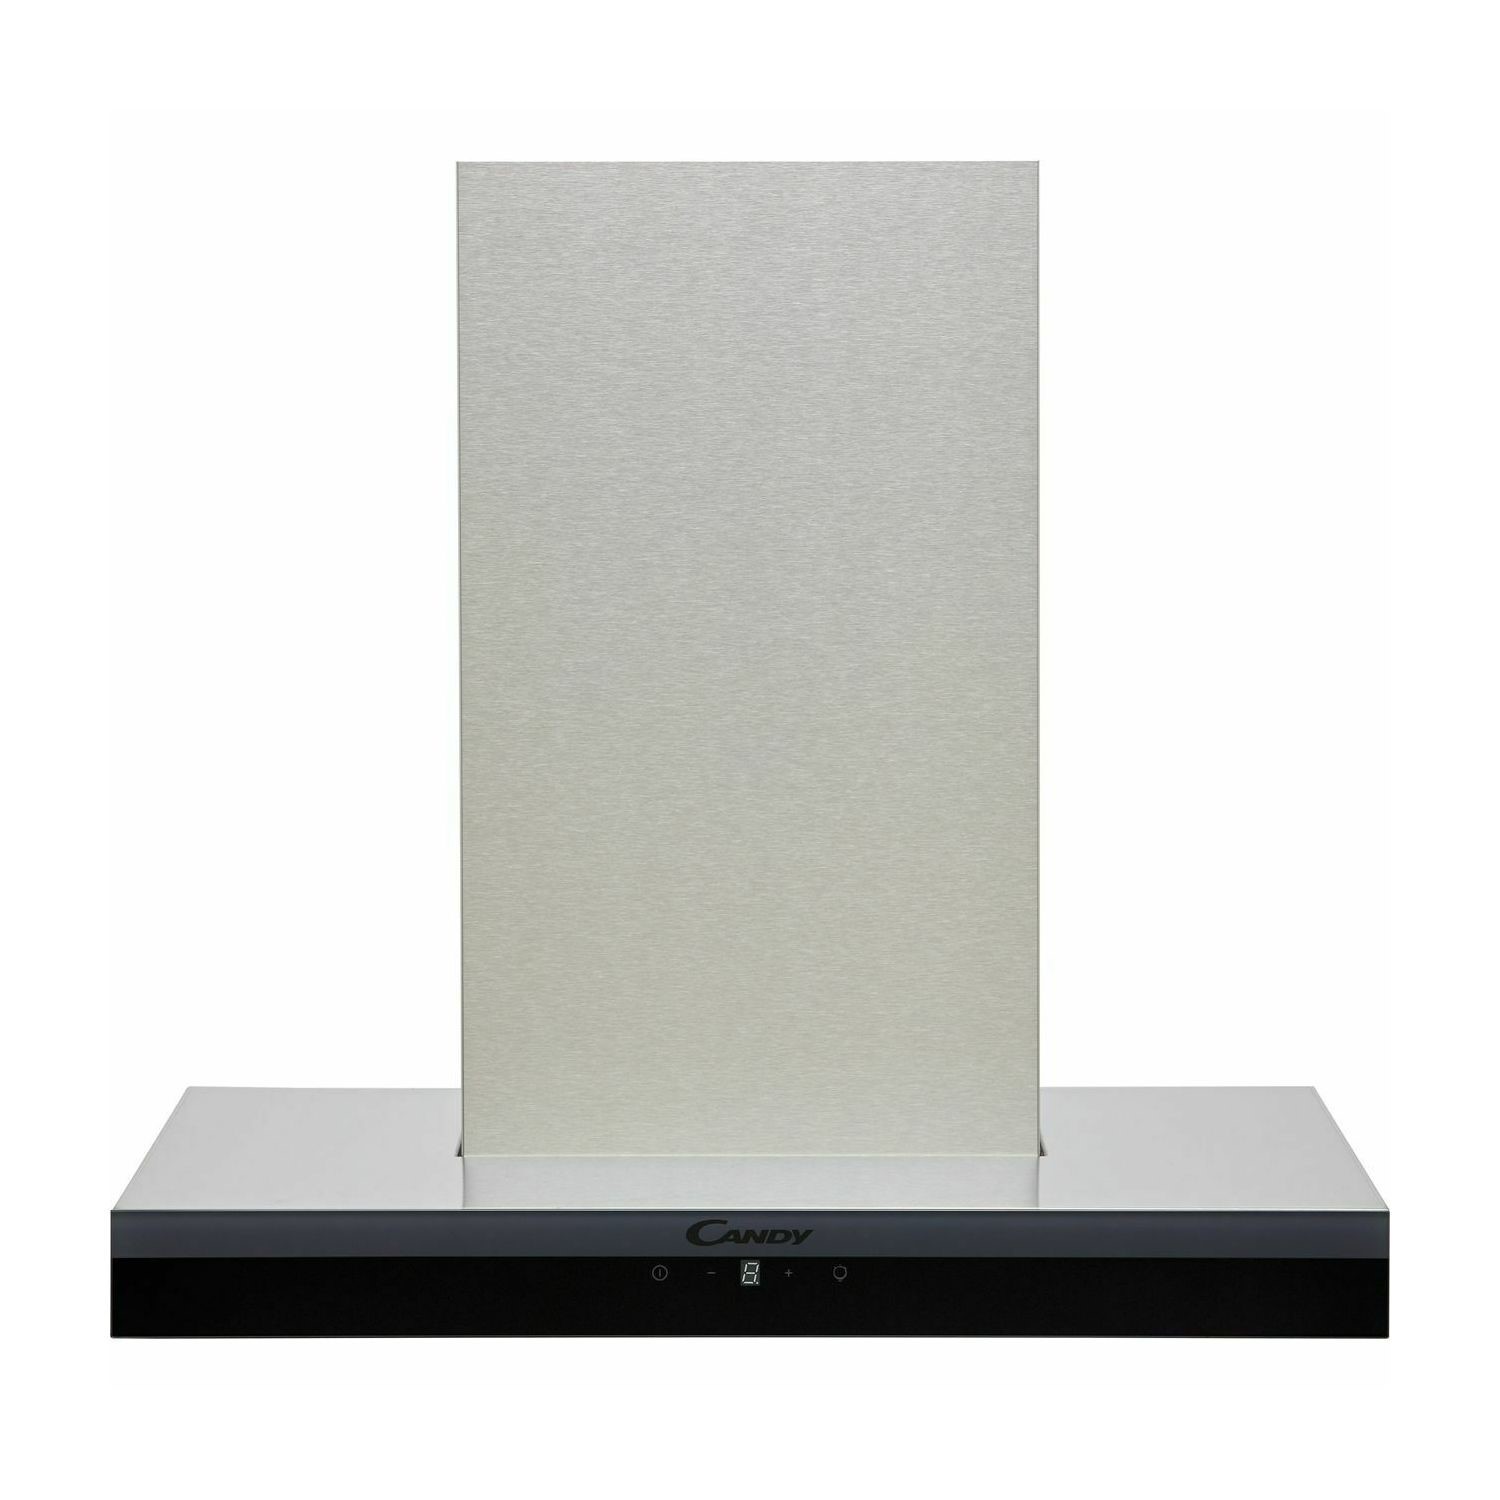 Refurbished Candy CTS6CEX Built In 60cm Chimney Cooker Hood Stainless Steel